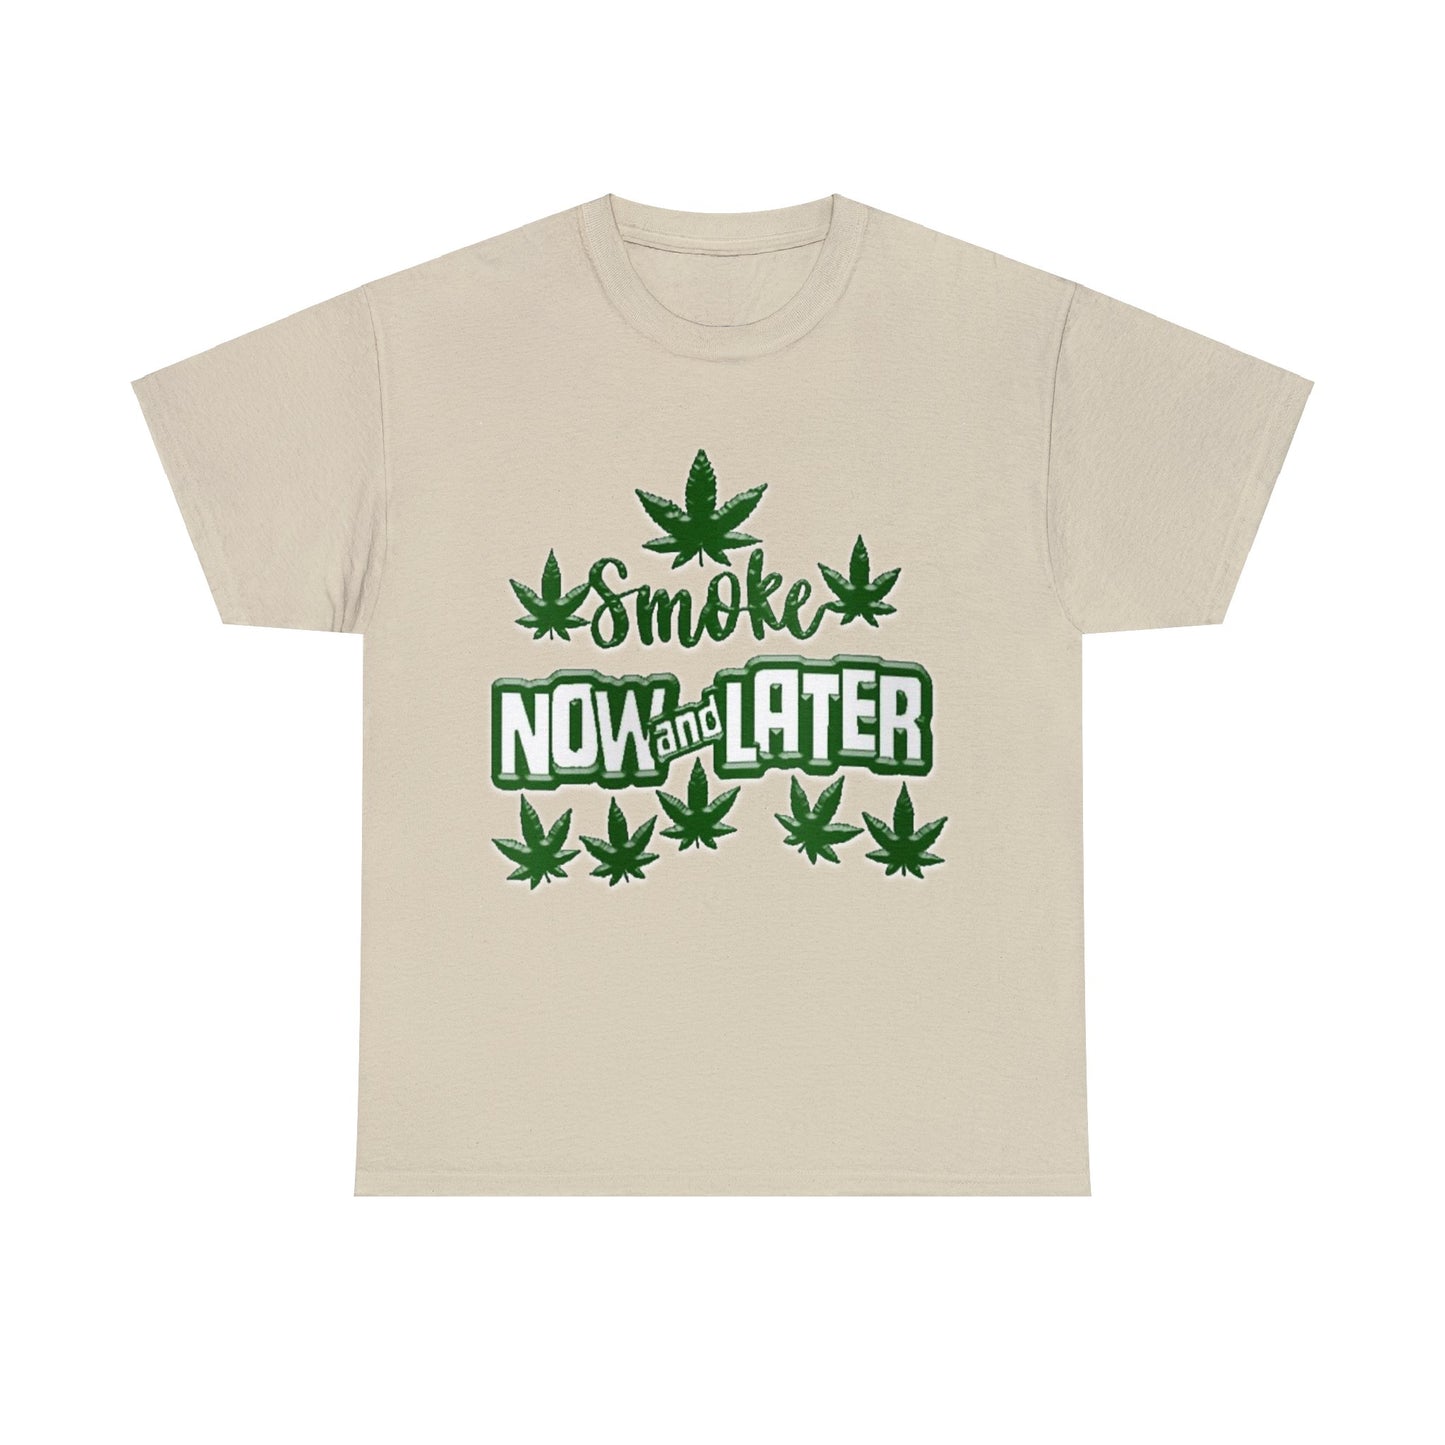 Now and Later Tee